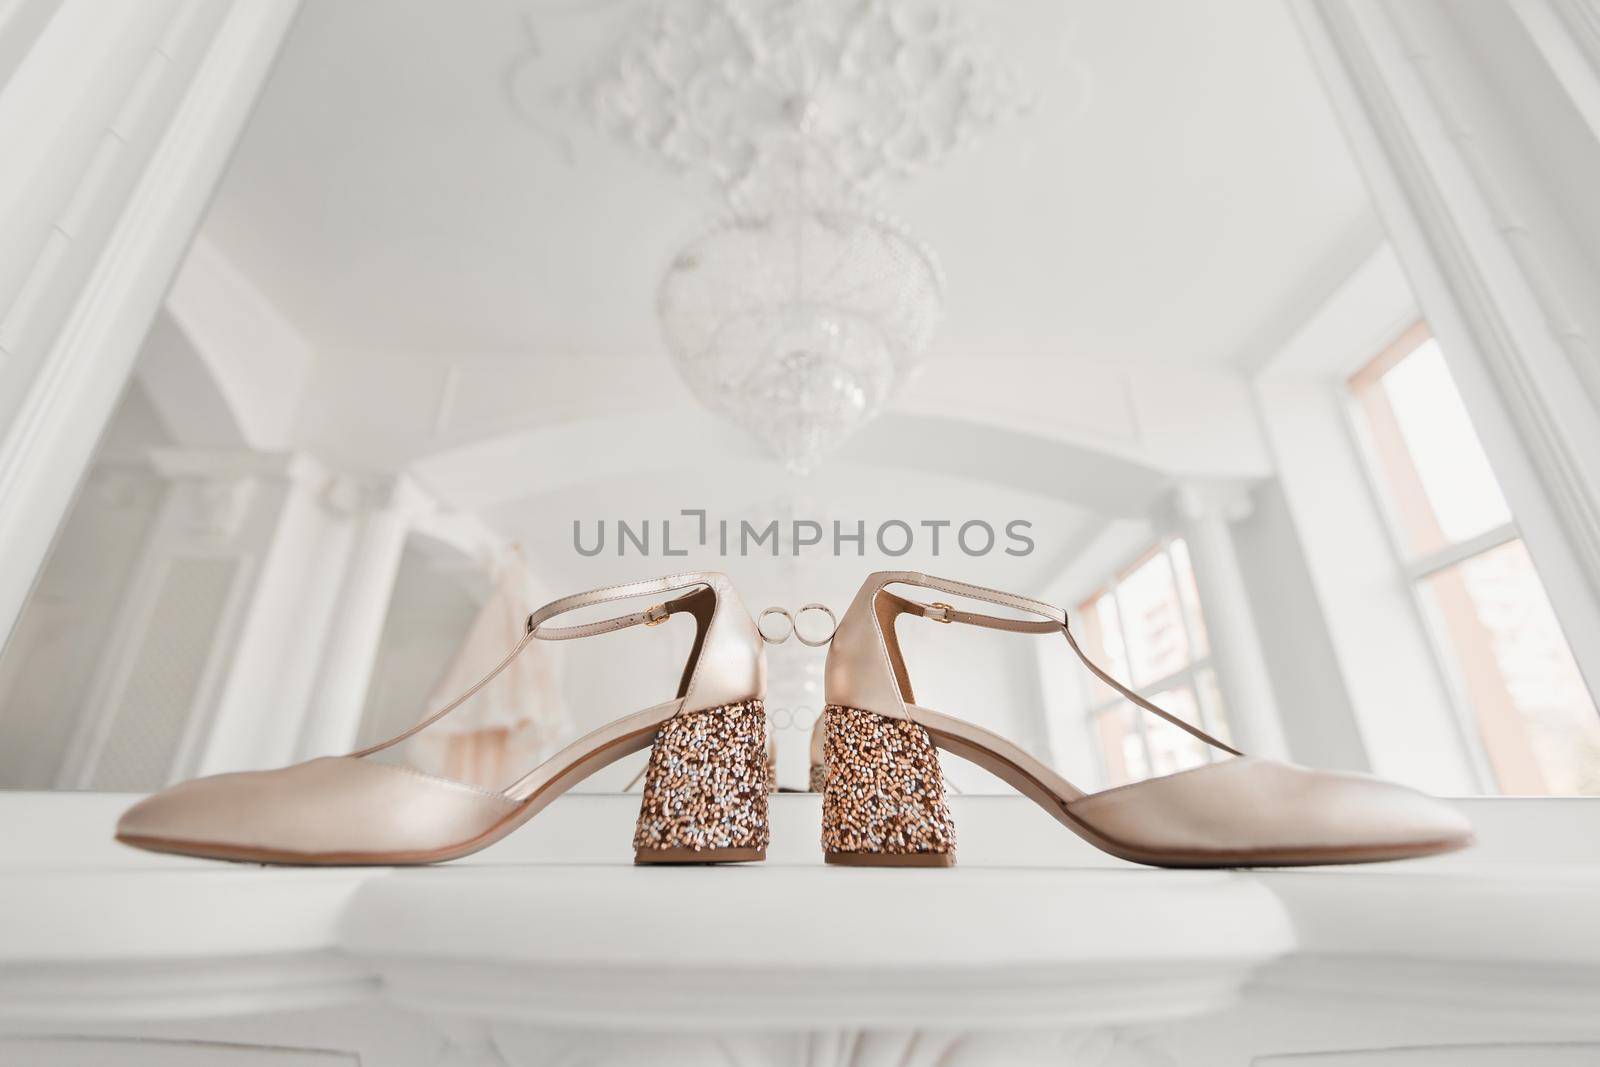 Gold wedding rings between the bride 's wedding shoes